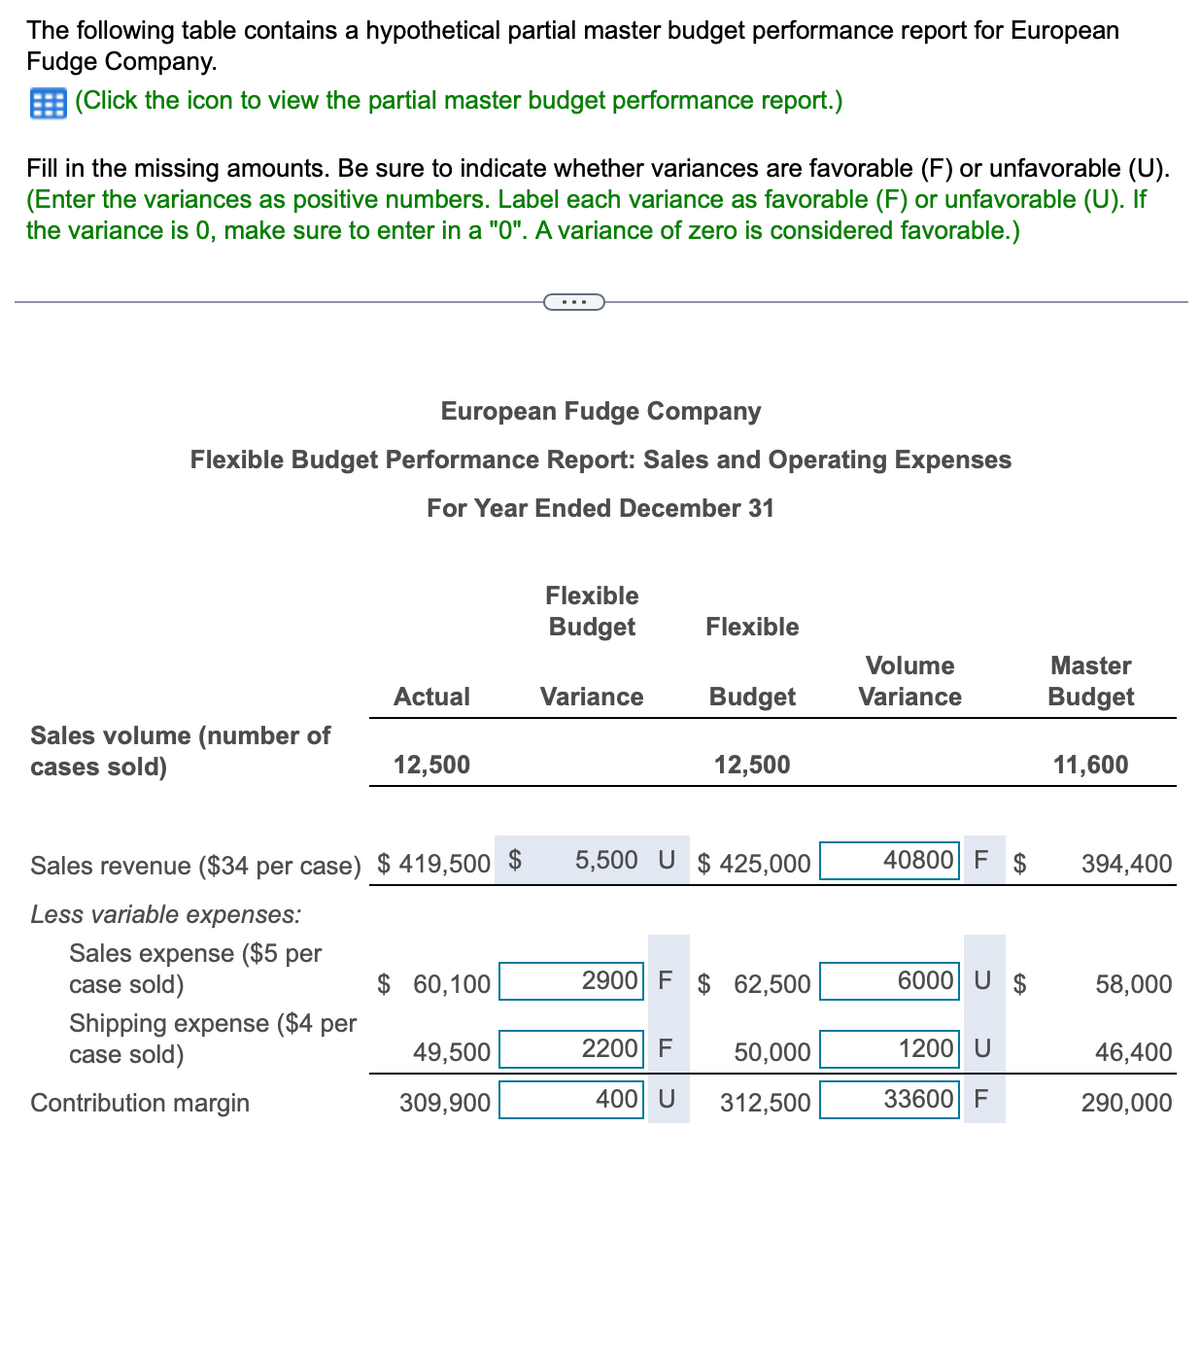 The following table contains a hypothetical partial master budget performance report for European
Fudge Company.
(Click the icon to view the partial master budget performance report.)
Fill in the missing amounts. Be sure to indicate whether variances are favorable (F) or unfavorable (U).
(Enter the variances as positive numbers. Label each variance as favorable (F) or unfavorable (U). If
the variance is 0, make sure to enter in a "0". A variance of zero is considered favorable.)
European Fudge Company
Flexible Budget Performance Report: Sales and Operating Expenses
For Year Ended December 31
Sales volume (number of
cases sold)
Shipping expense ($4 per
case sold)
Actual
Sales revenue ($34 per case) $ 419,500 $
Less variable expenses:
Sales expense ($5 per
case sold)
Contribution margin
12,500
$ 60,100
49,500
309,900
Flexible
Budget
Variance
Flexible
Budget
2200 F
400 U
12,500
5,500 U $425,000
2900 F $ 62,500
50,000
312,500
Volume
Variance
40800 F $
6000 U$
1200 U
33600 F
Master
Budget
11,600
394,400
58,000
46,400
290,000